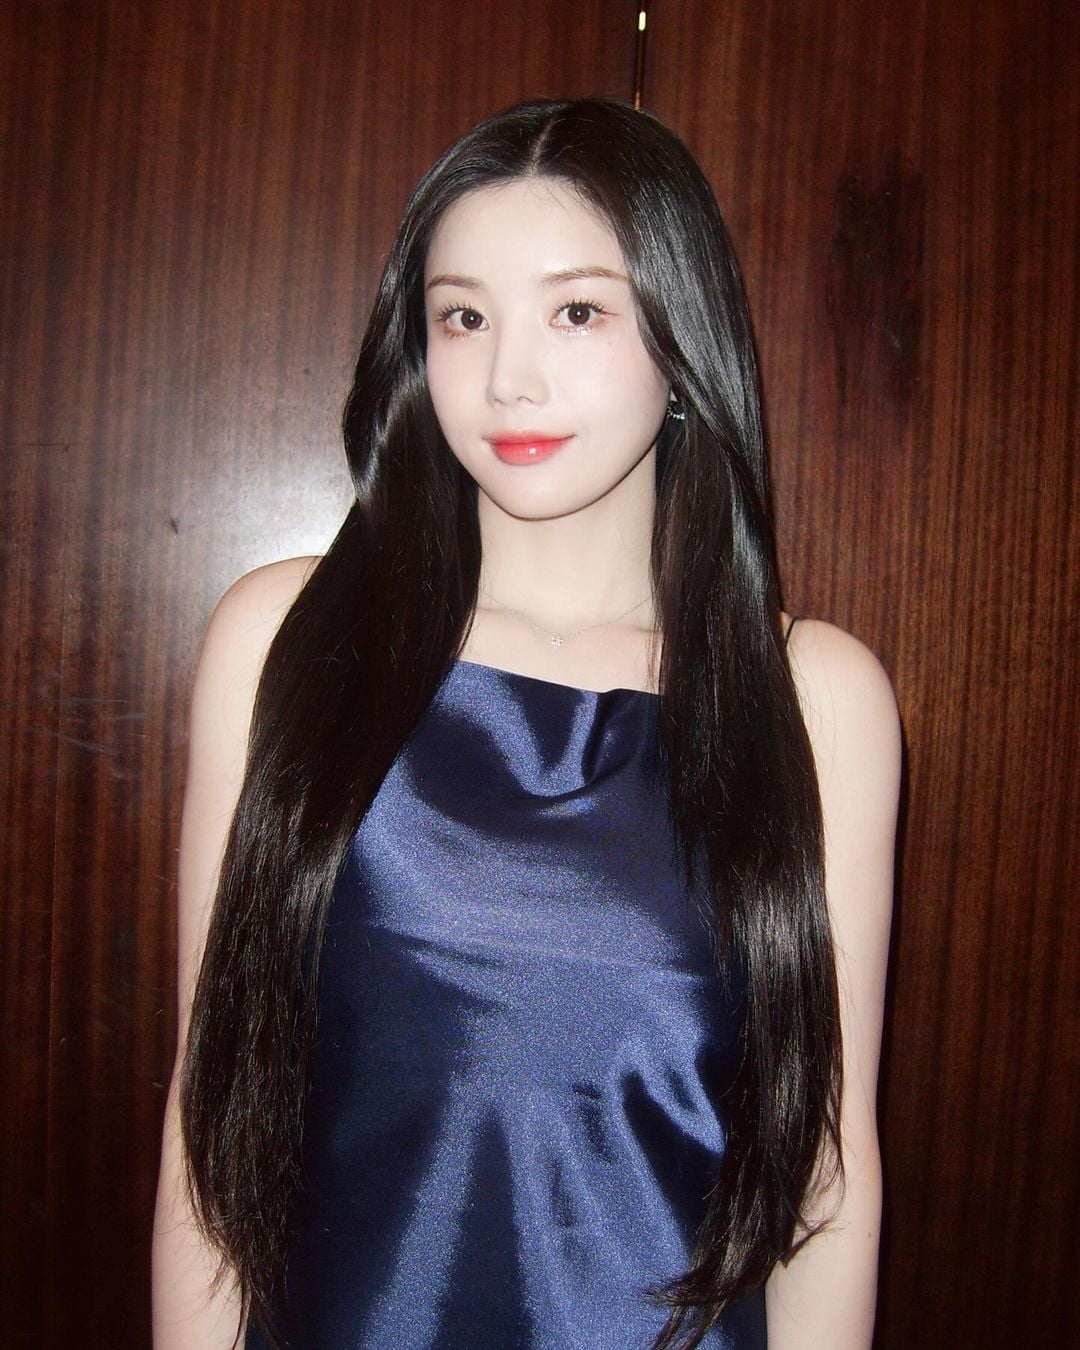 Eunbi Kwon, she looks like a water bomb goddess... Even though it’s just a halterneck, it shows volume.